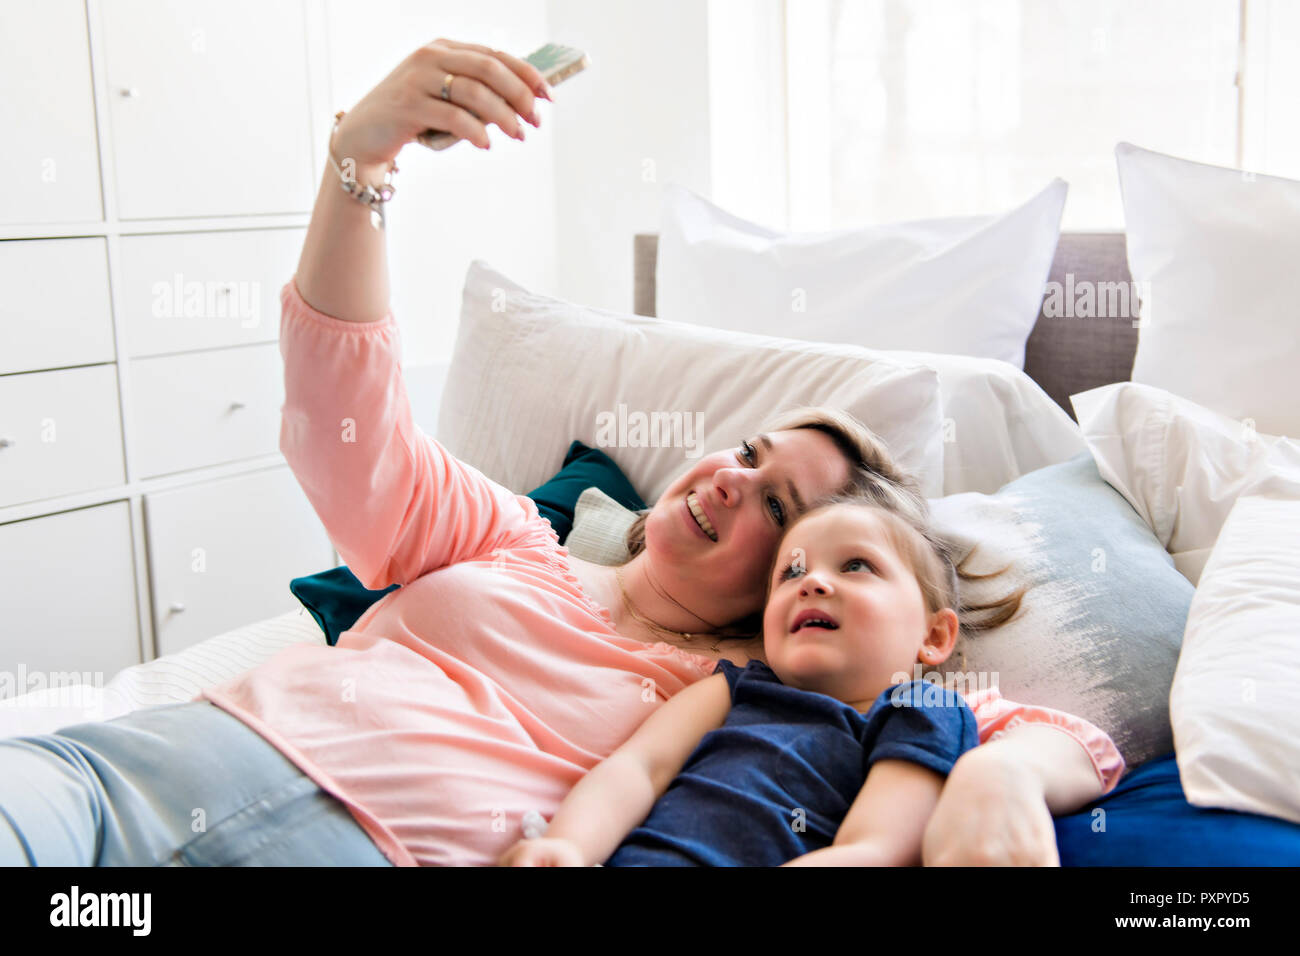 woman and children taking selfie with smartphone on bed Stock Photo